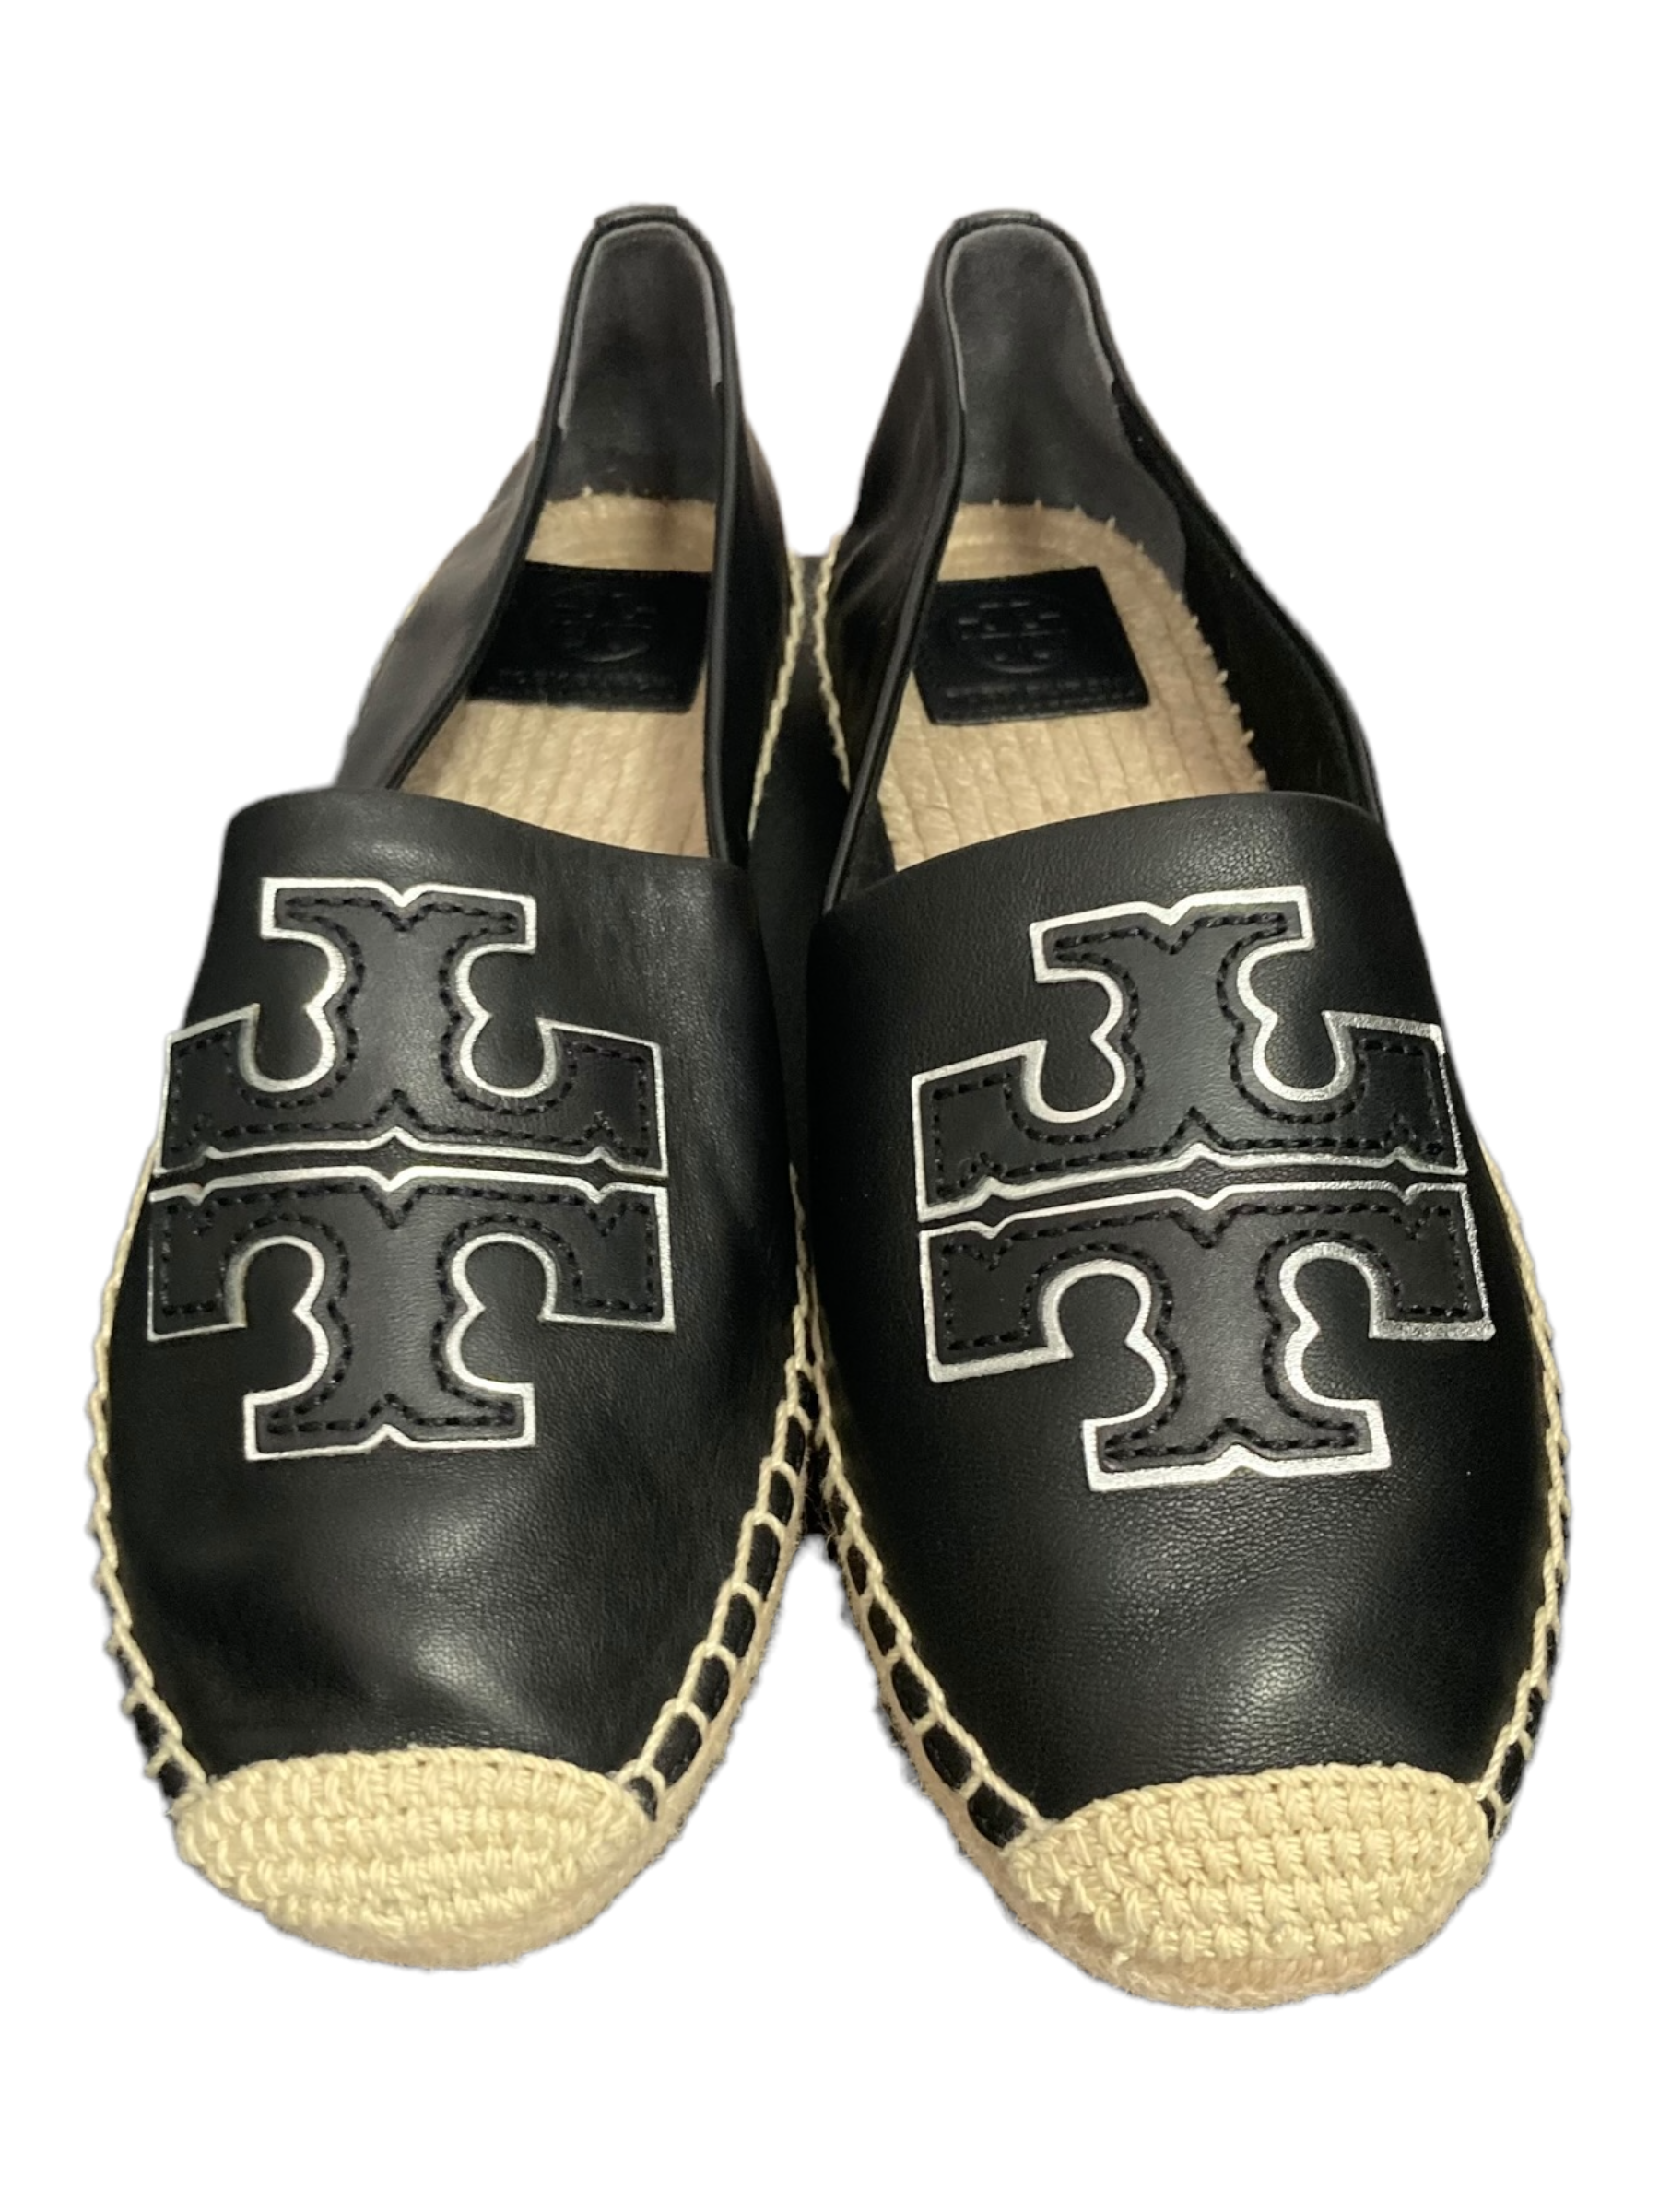 Shoes Designer By Tory Burch Size:  – Clothes Mentor Dublin OH #128